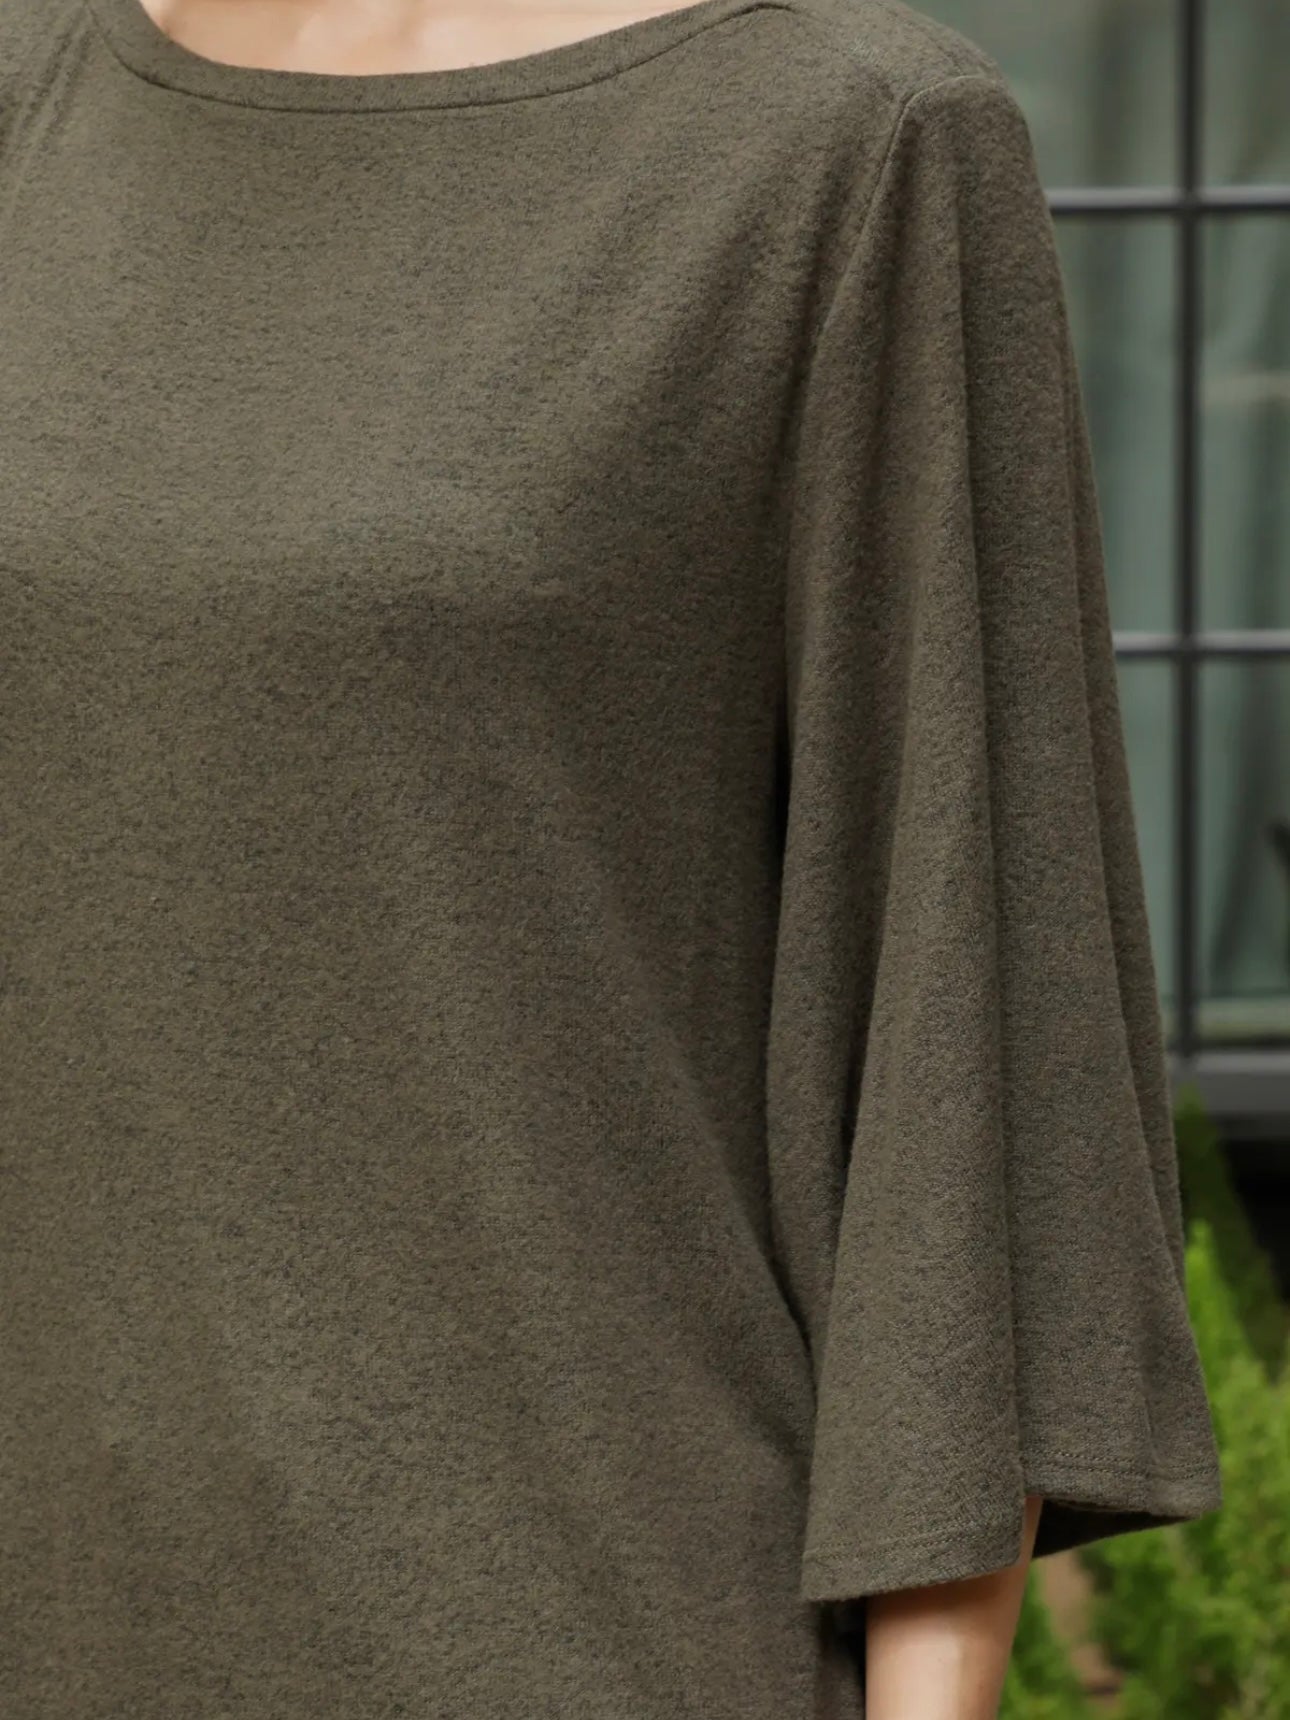 Olive Brushed Hacci Top